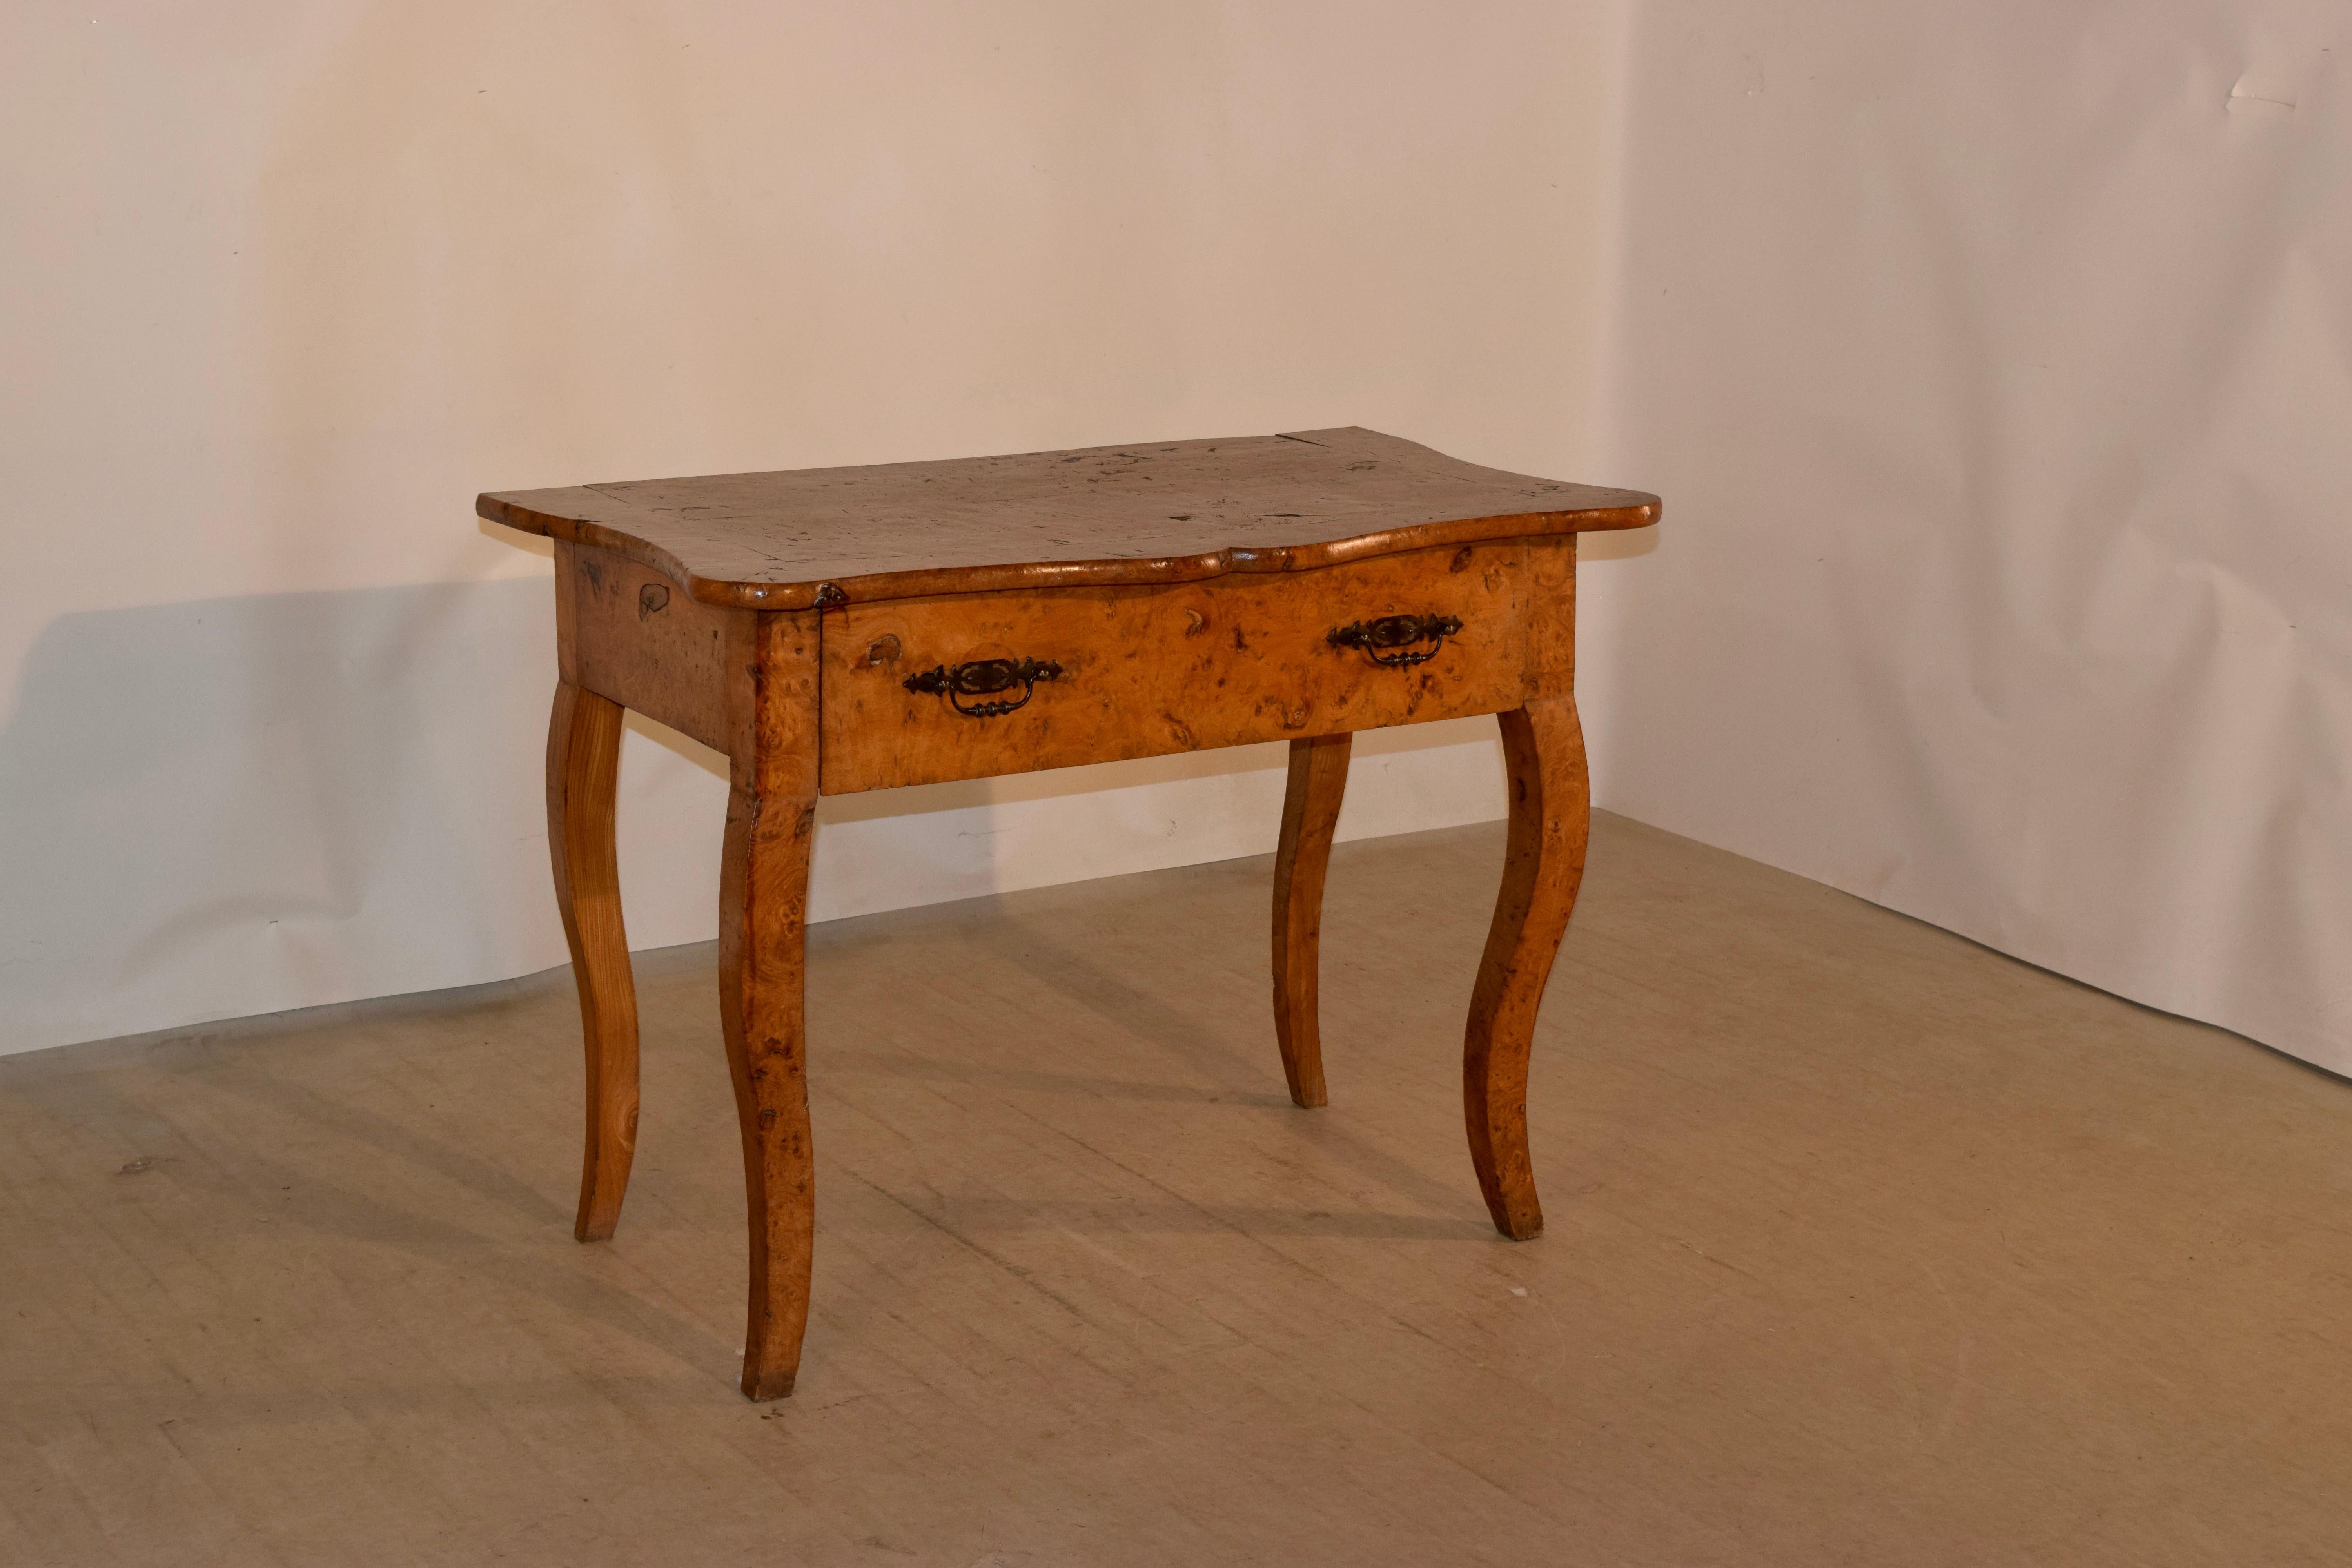 19th century burl elm console from France with a banded and scalloped edge around the top, following down to a single drawer in the front and simple sides, all supported on hand carved cabriole legs.